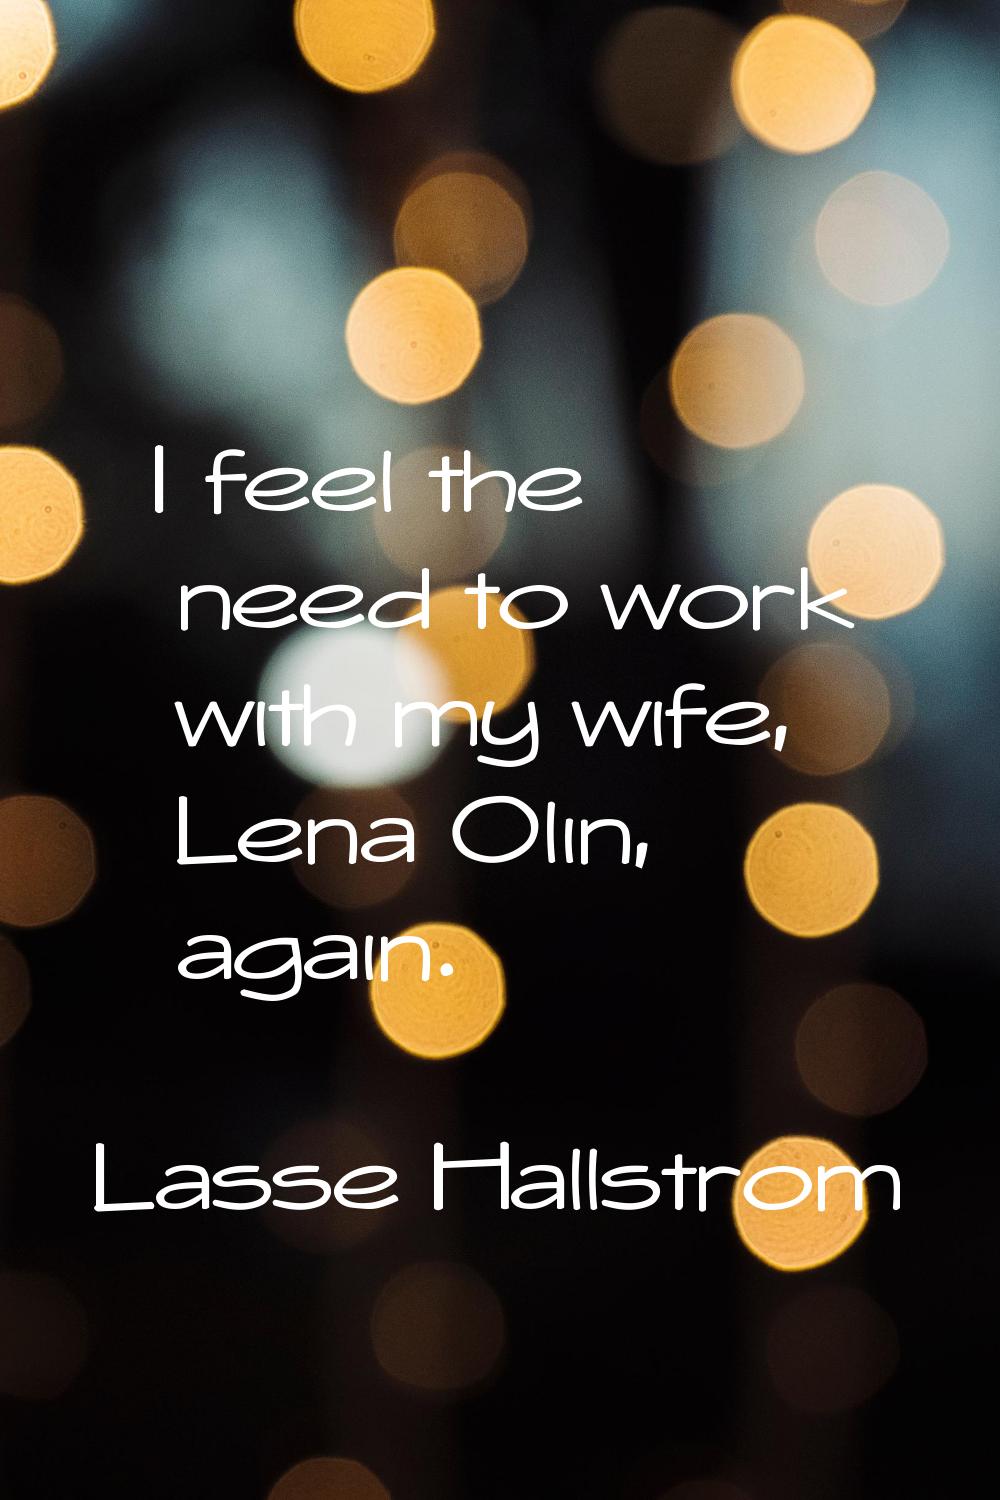 I feel the need to work with my wife, Lena Olin, again.